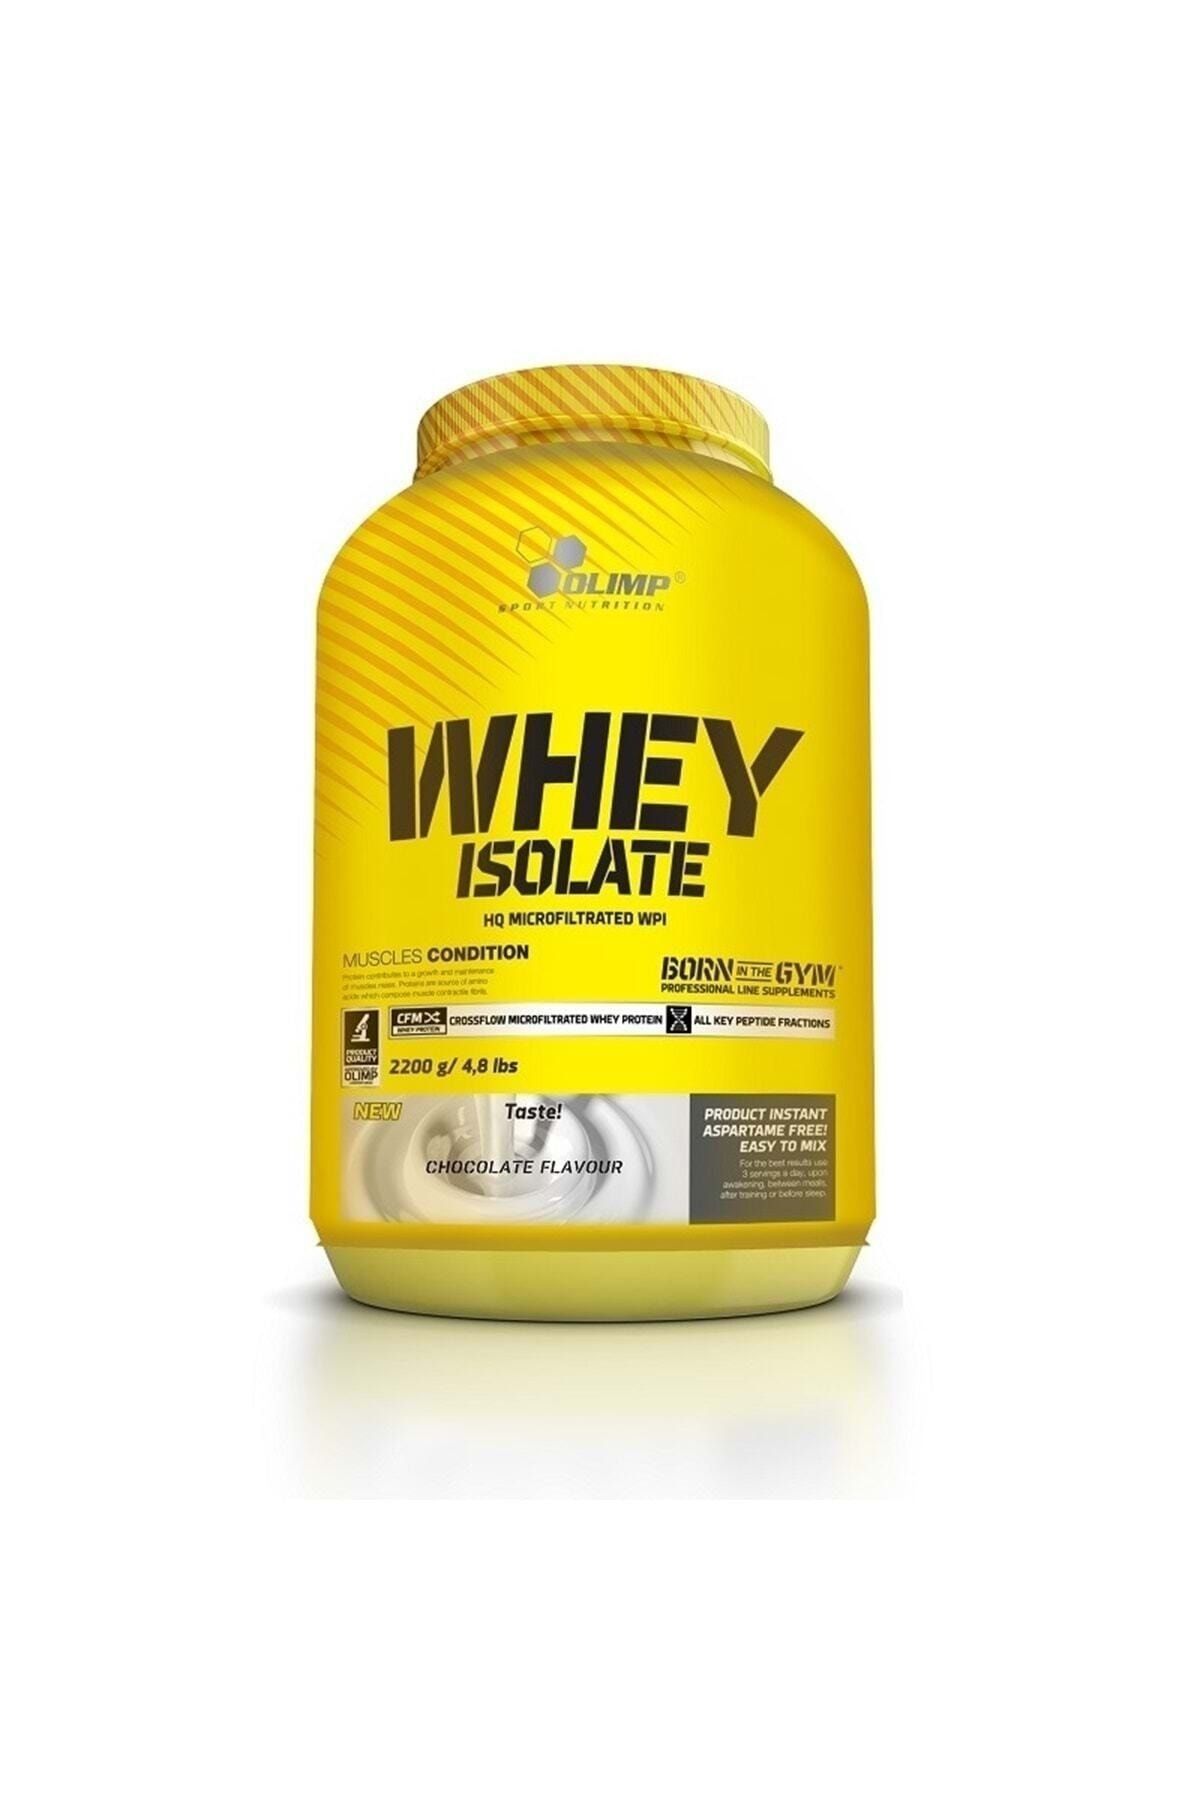 Olimp Isole Whey 1800 Gr Stawberry